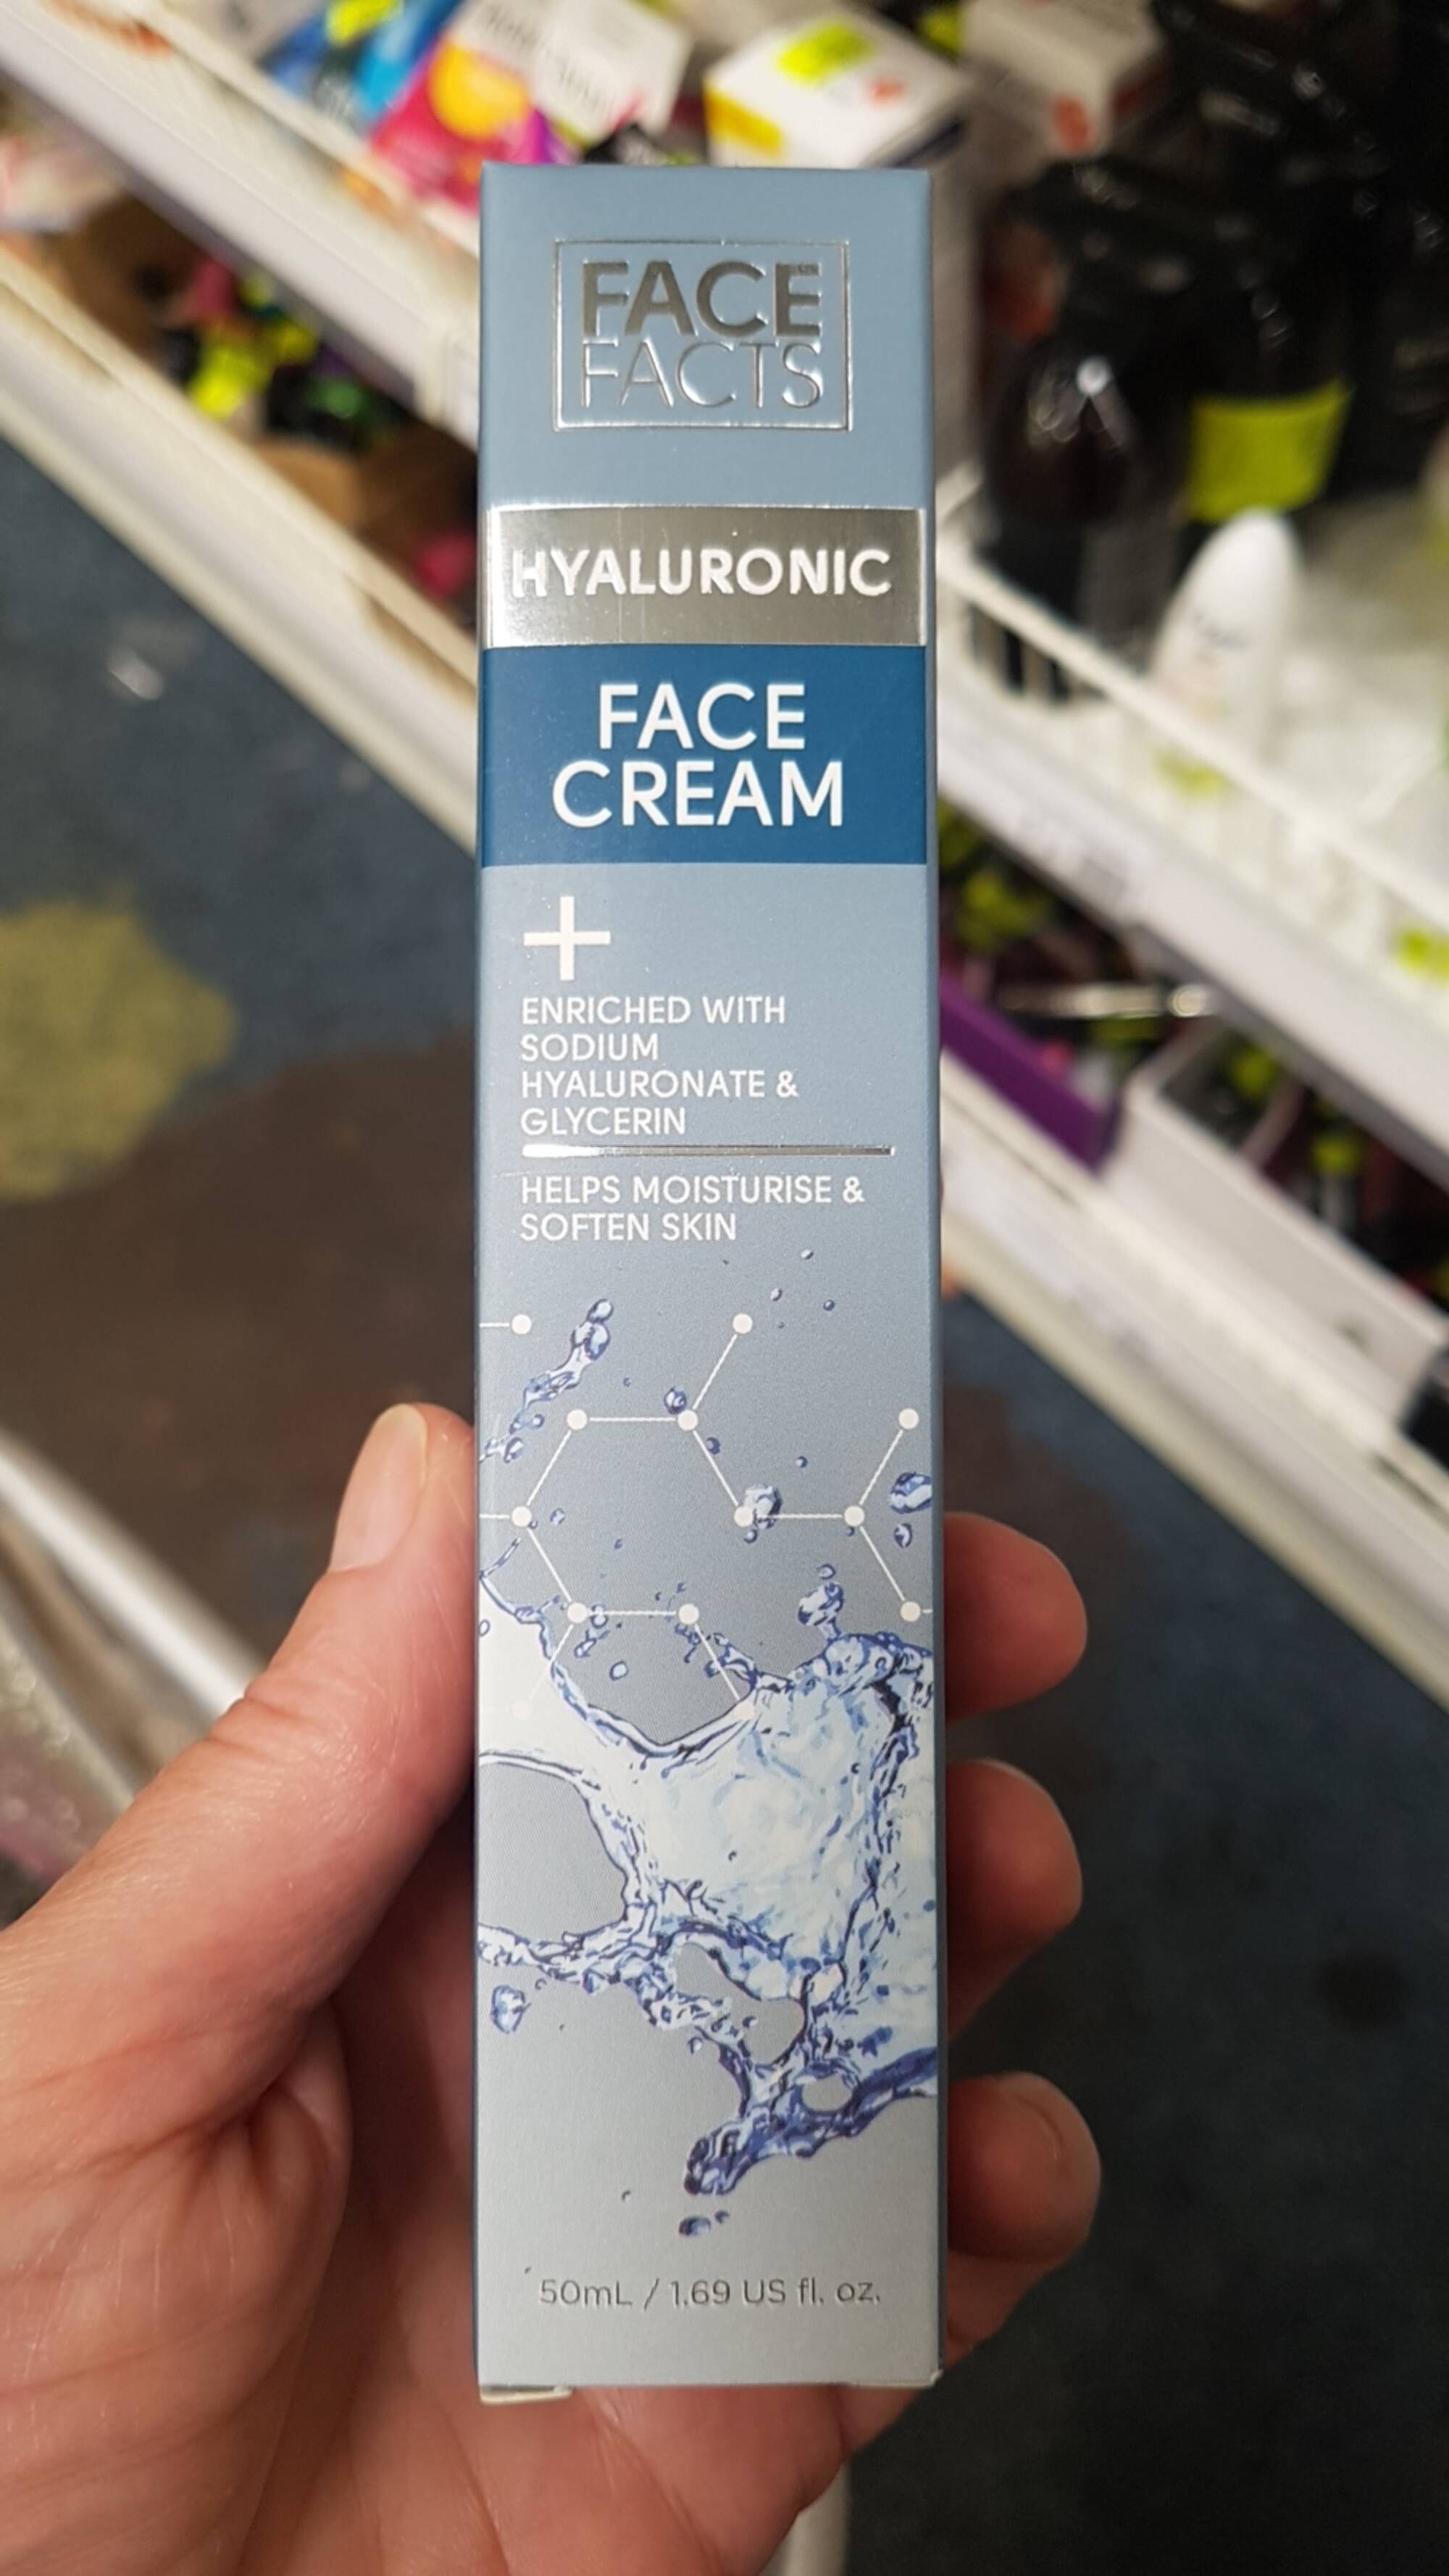 FACE FACTS - Hyaluronic - Face cream